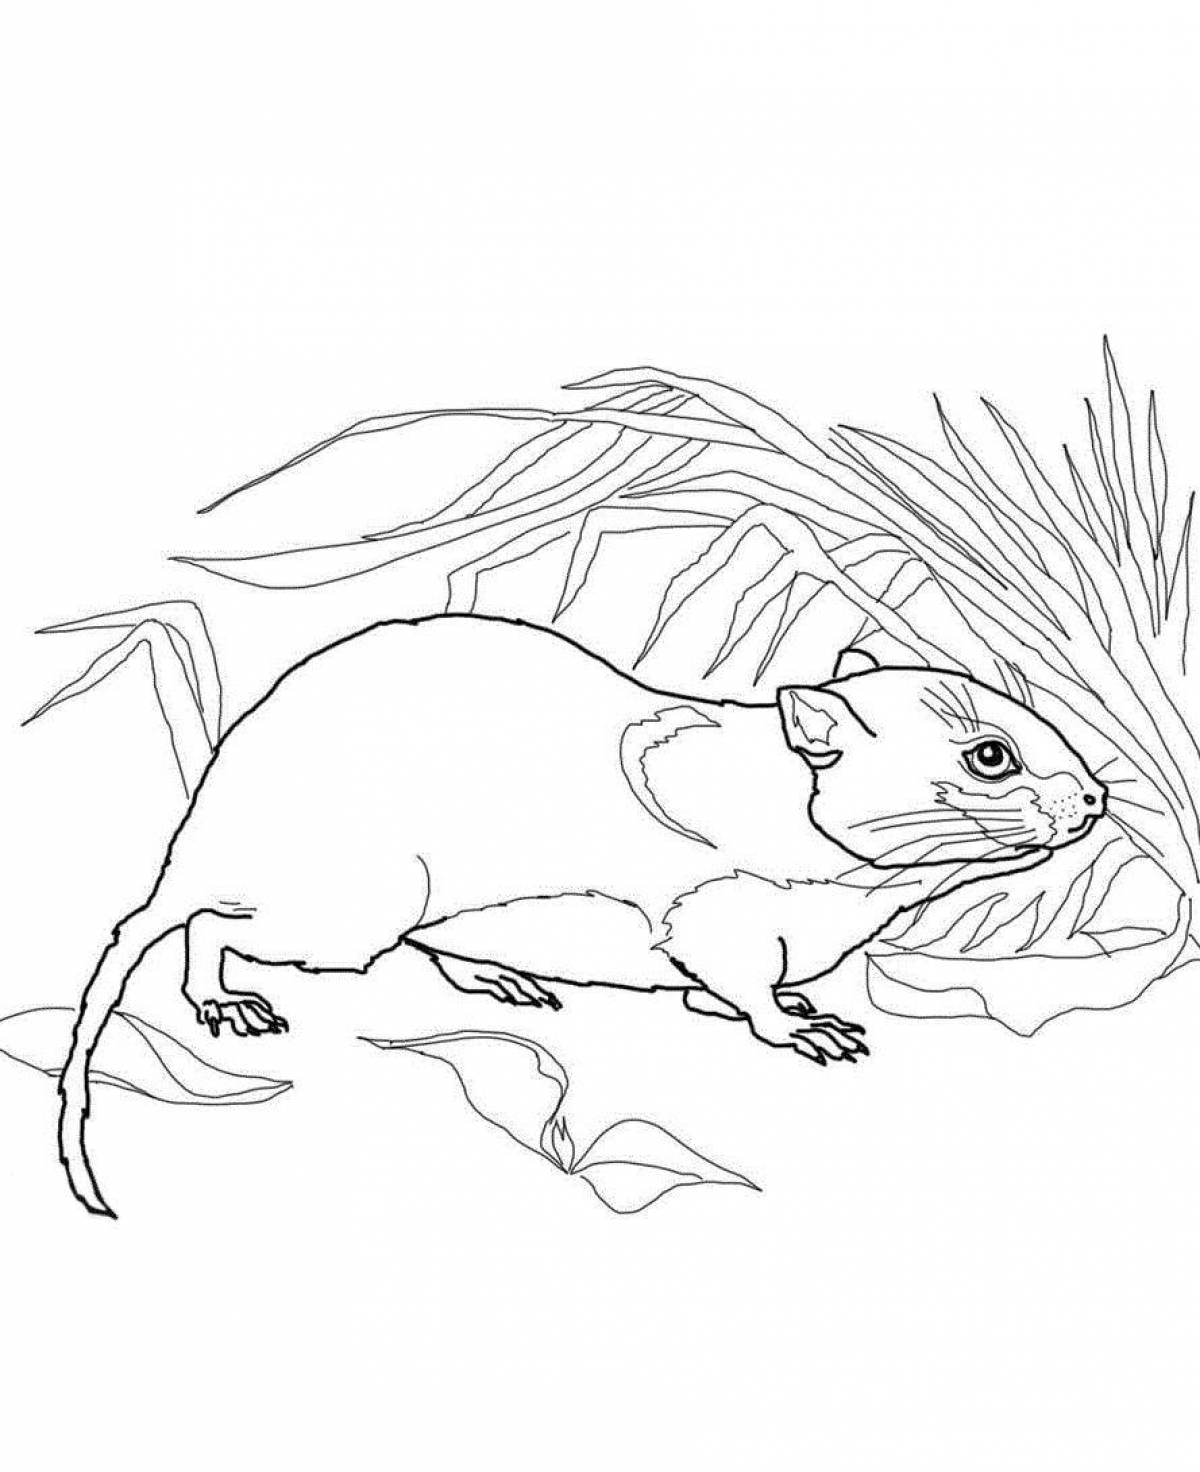 Cute harvest mouse coloring page